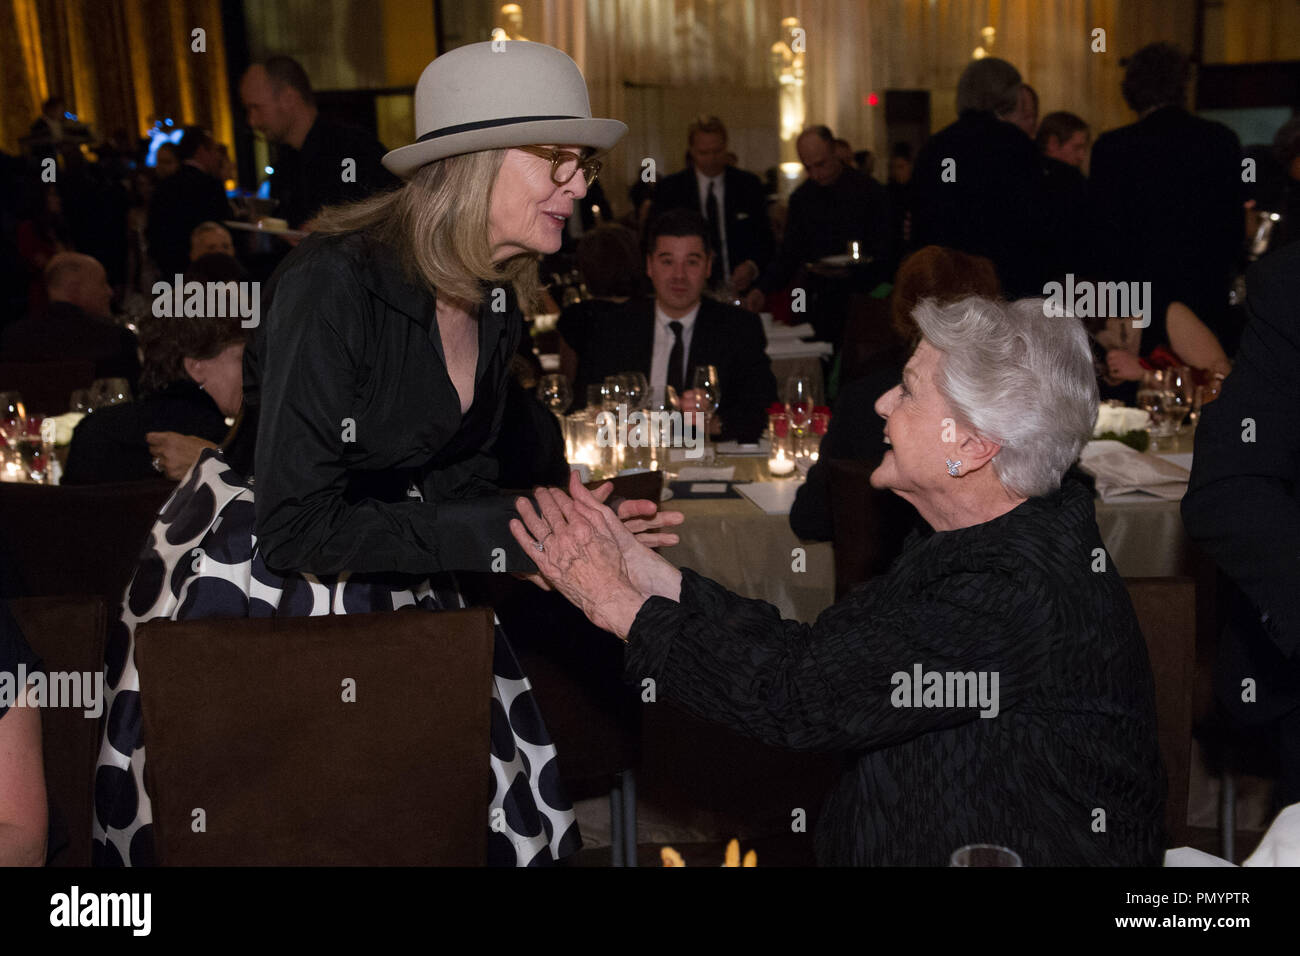 Actress Diane Keaton (left) and Honorary Award recipient Angela Lansbury attend the 5th Annual Governors Awards at The Ray Dolby Ballroom at Hollywood & Highland Center® in Hollywood, CA, on Saturday, November 16, 2013.  File Reference # 32184 010  For Editorial Use Only -  All Rights Reserved Stock Photo